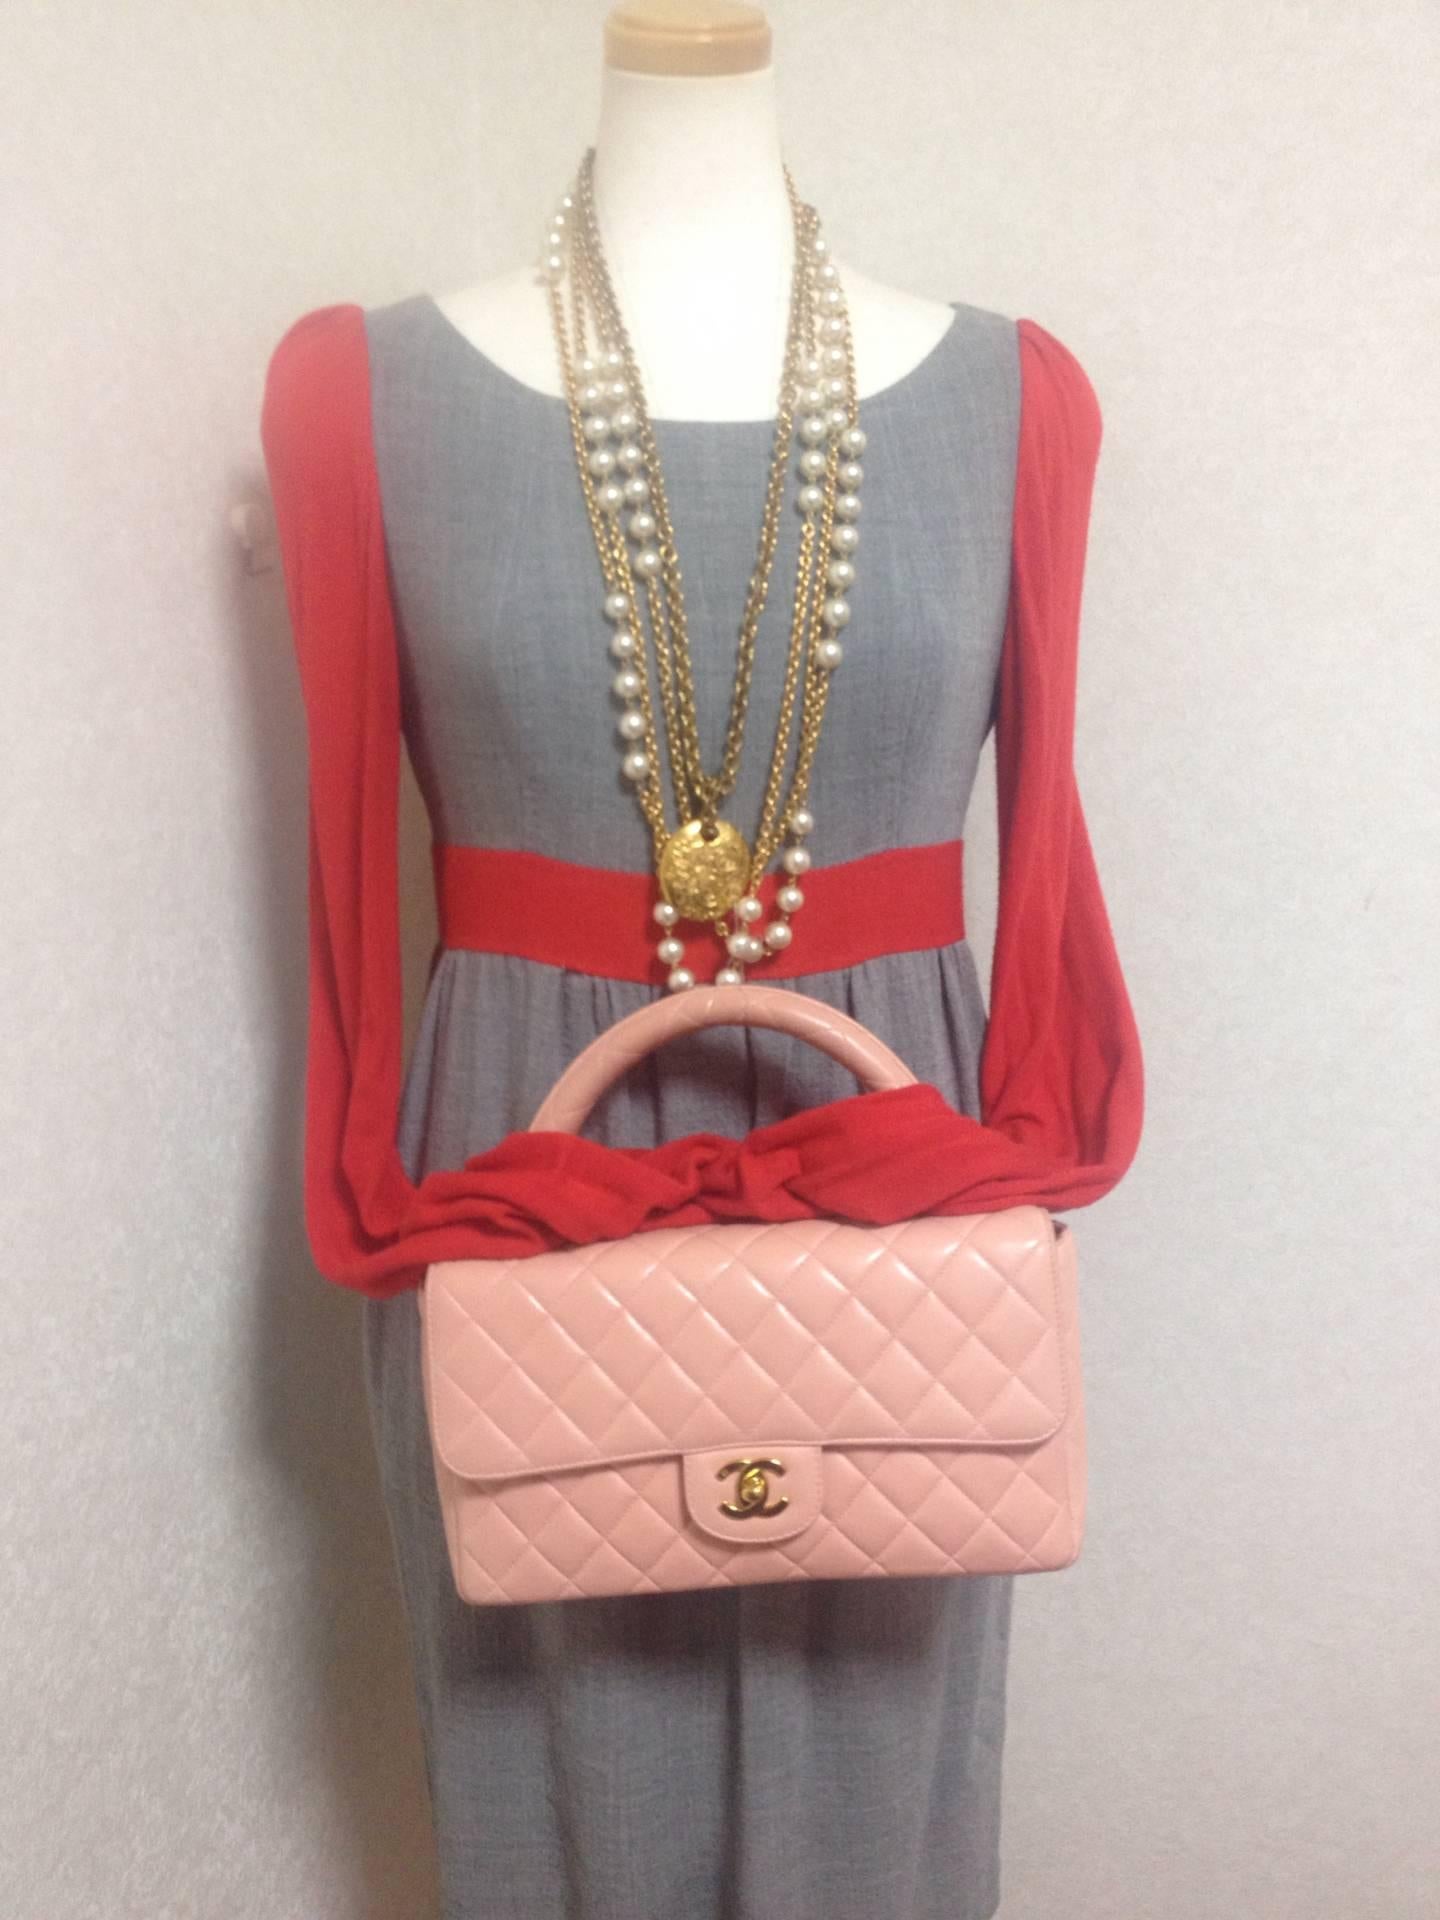 Vintage CHANEL milky pink color lambskin classic 2.55 handbag purse with gold CC For Sale 4